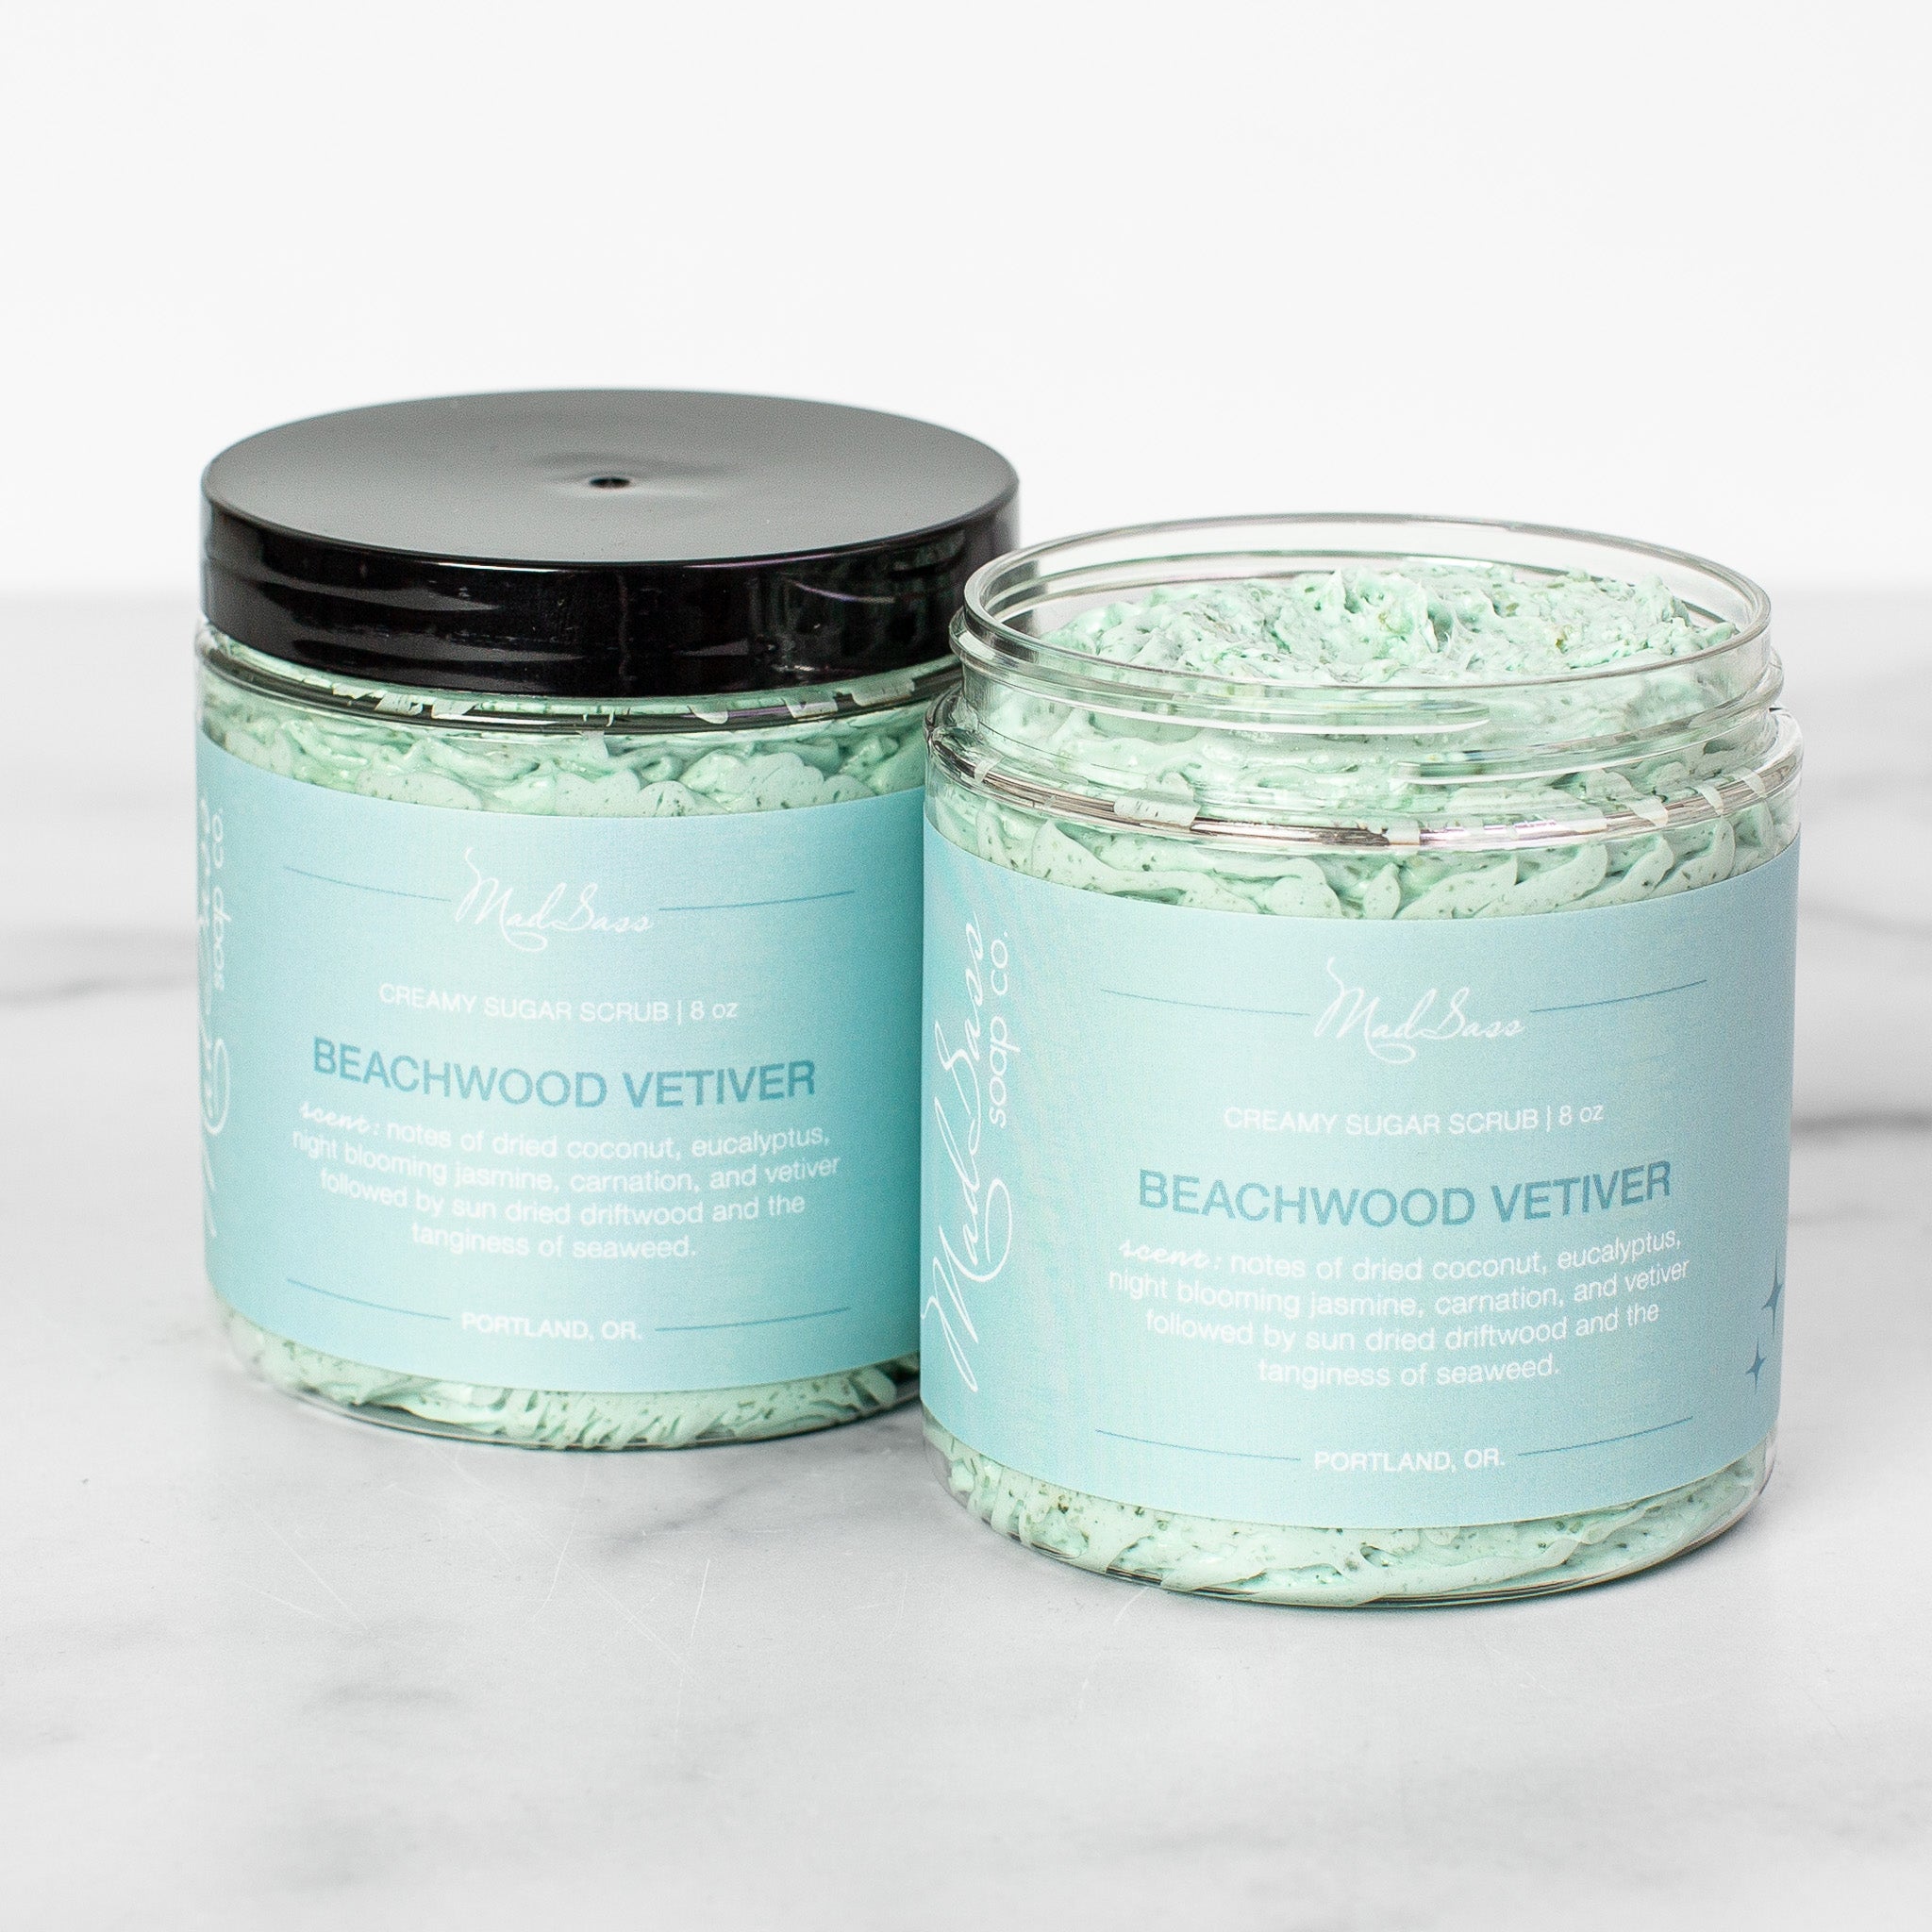 Two containers of Beachwood Vetiver Creamy Sugar Scrubs on a white background. Beachwood Vetiver is a light blue scrub in a clear tub with a black lid.